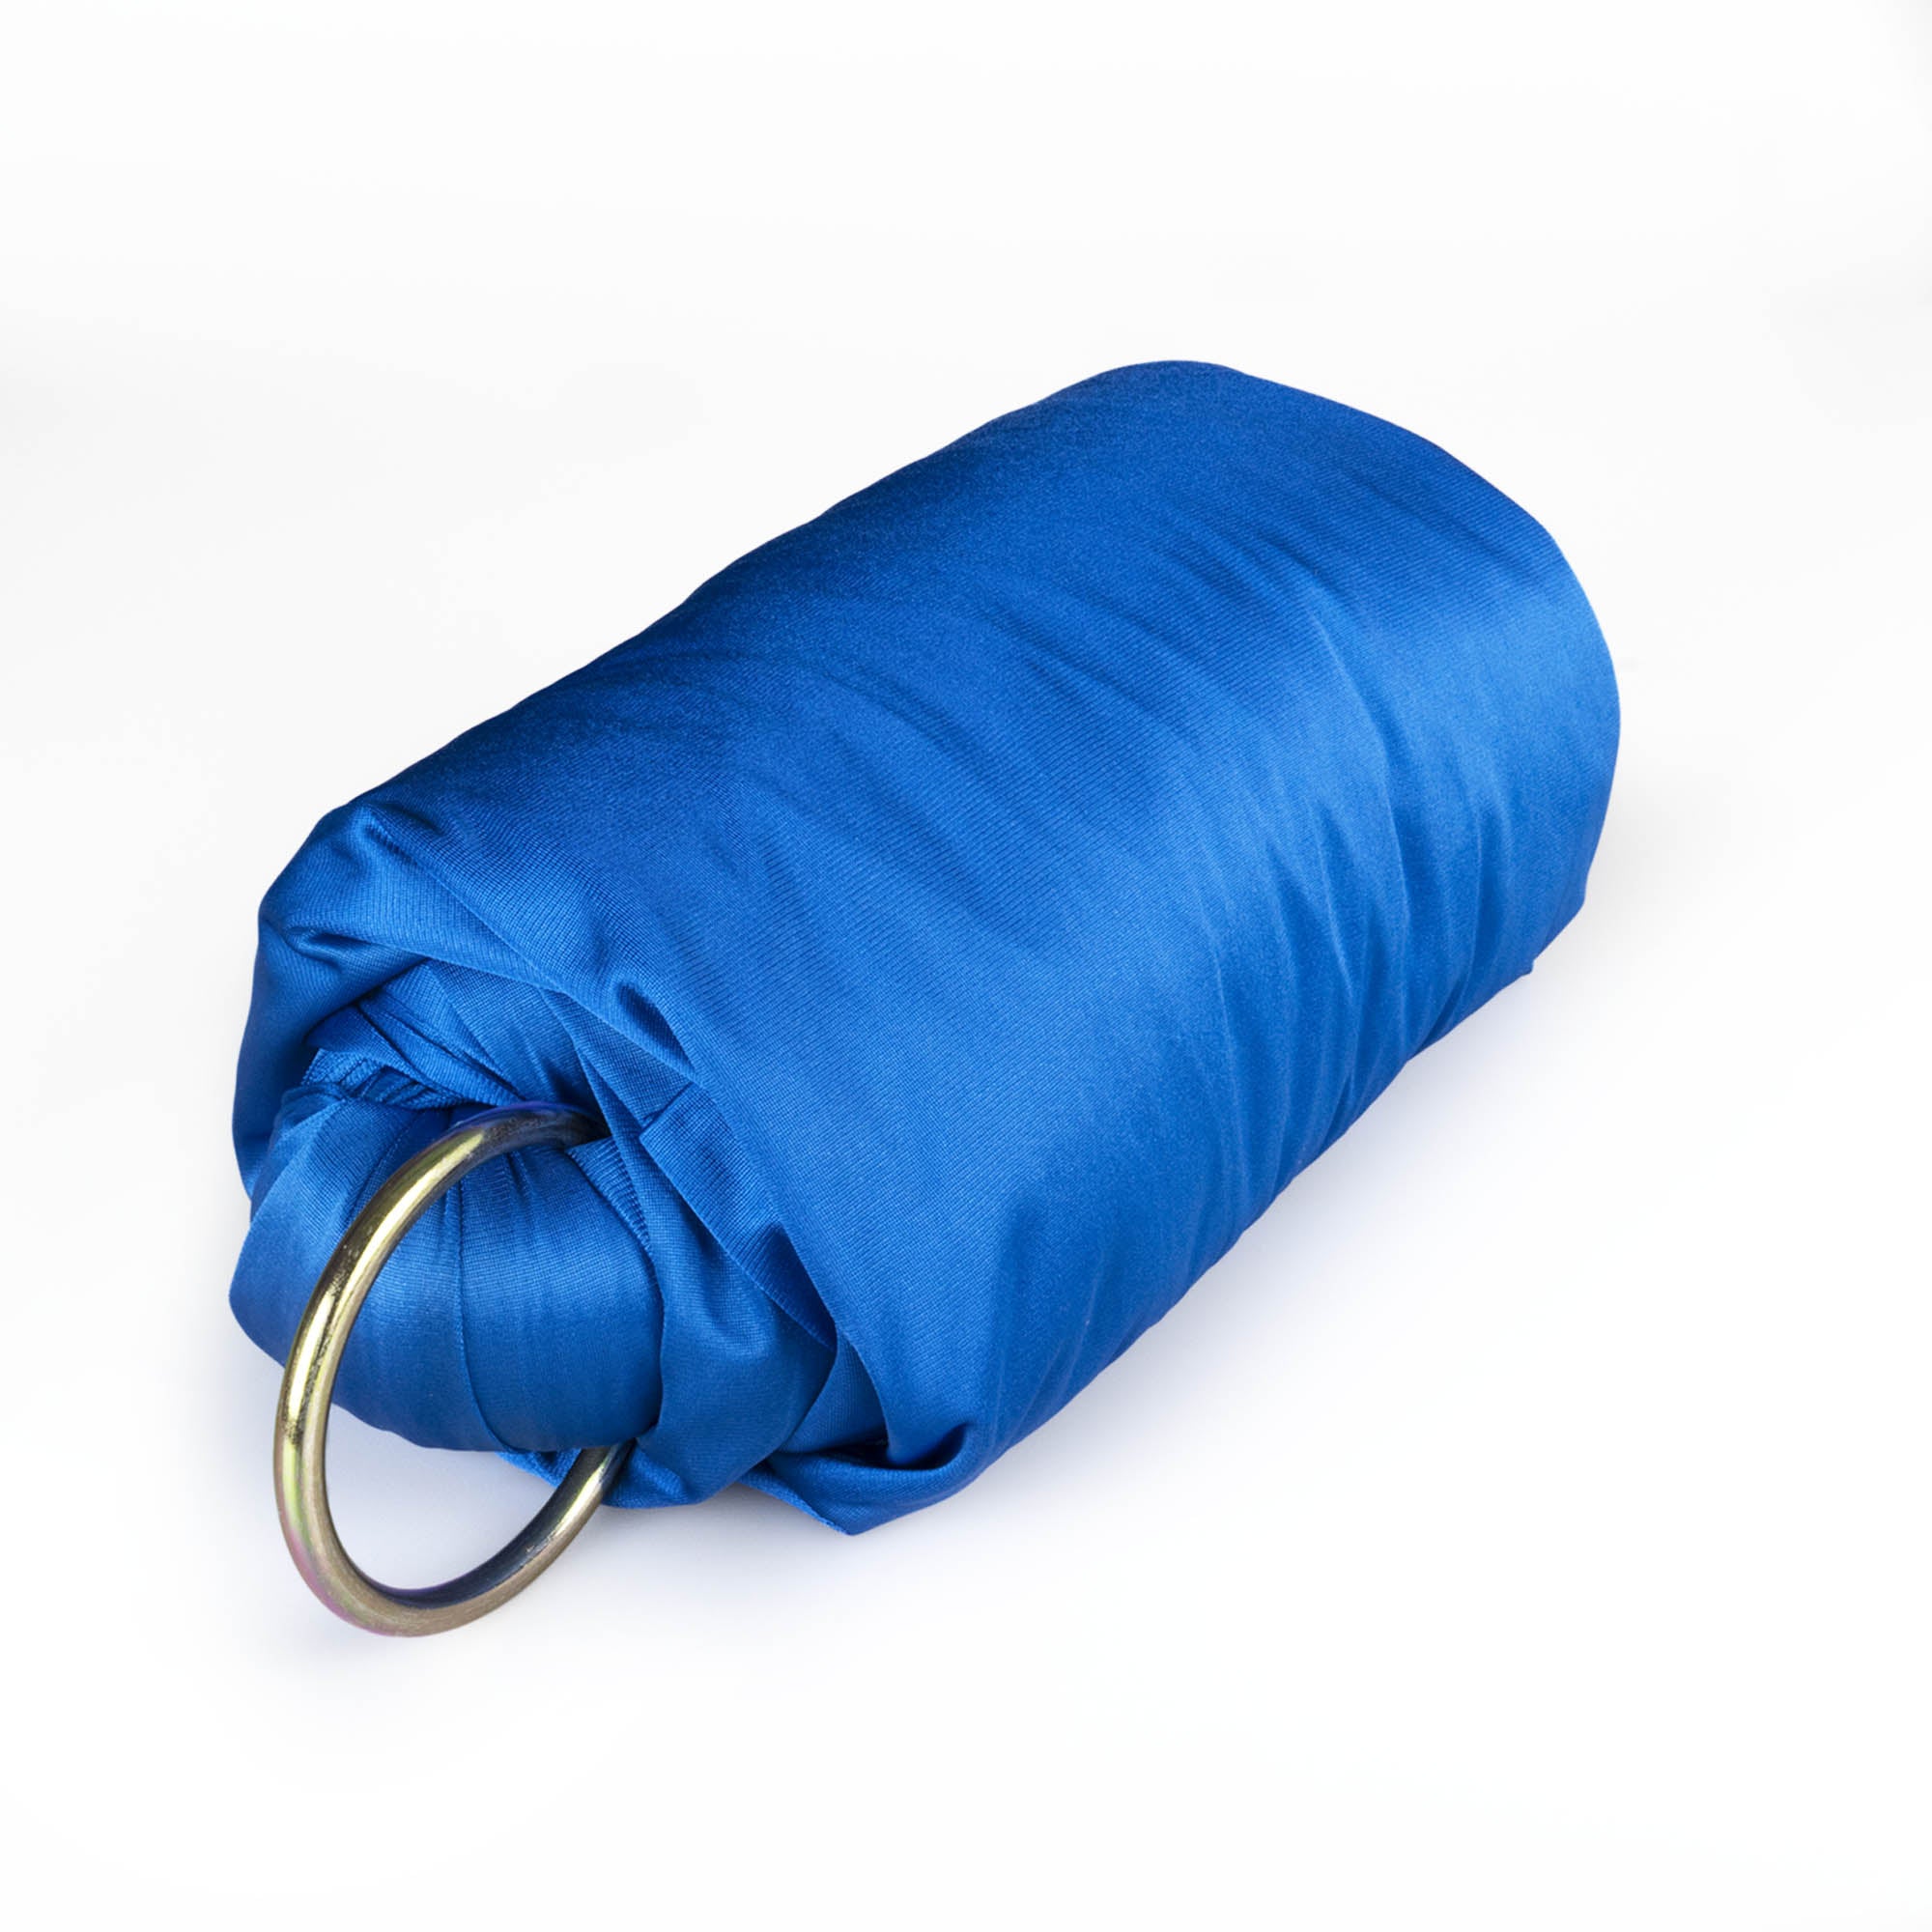 Royal blue yoga hammock with O rings attached